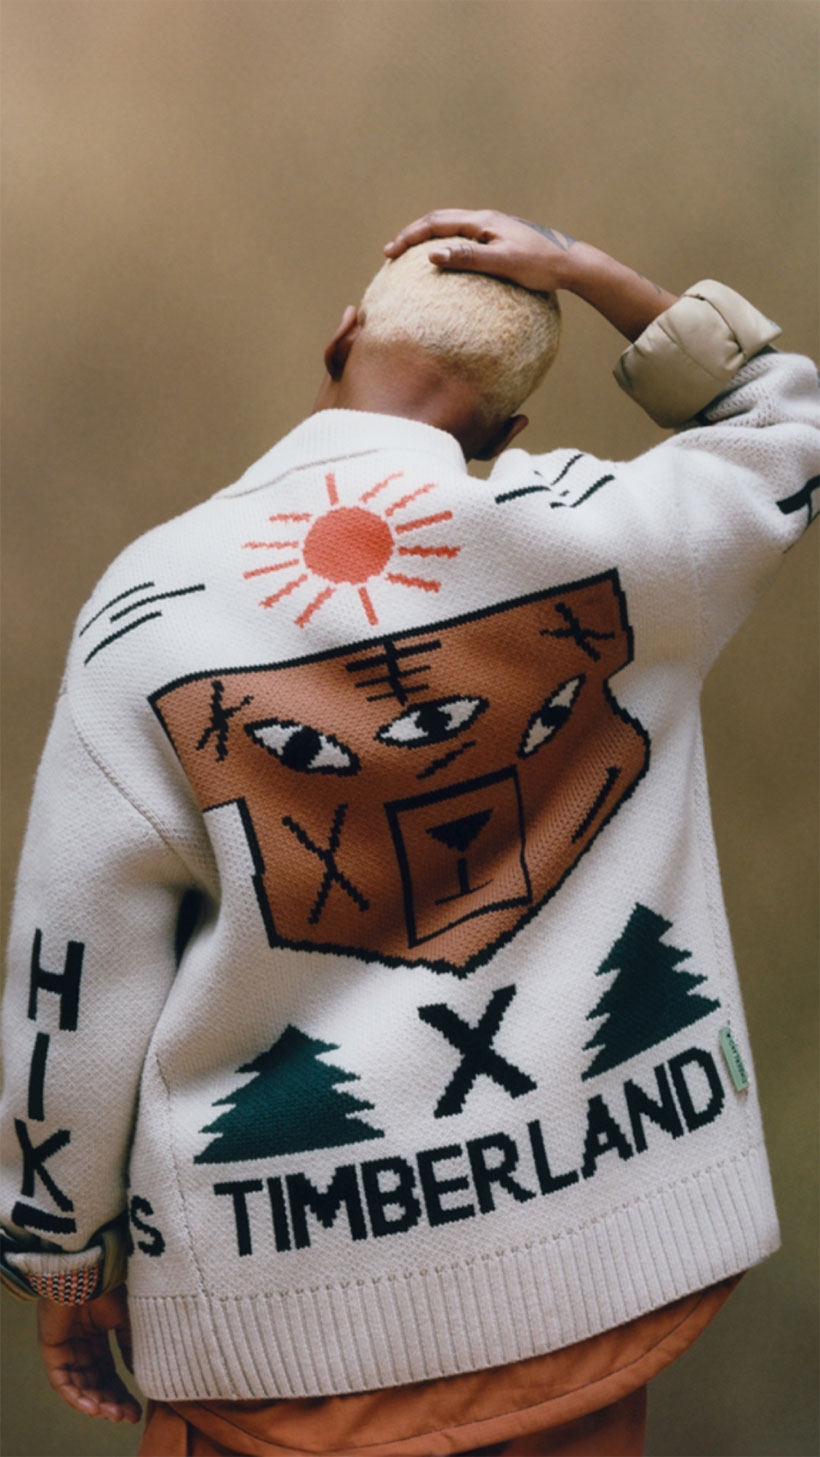 A standing person with their right hand on their head, photographed from the waist up from behind, wearing a white cardigan with a knit design of an orange sun, a brown shape containing three eye-like shapes and several black shapes above a black X between green pine tree shapes, above the word TIMBERLAND in black. The word HIKE is knitted into the arms.